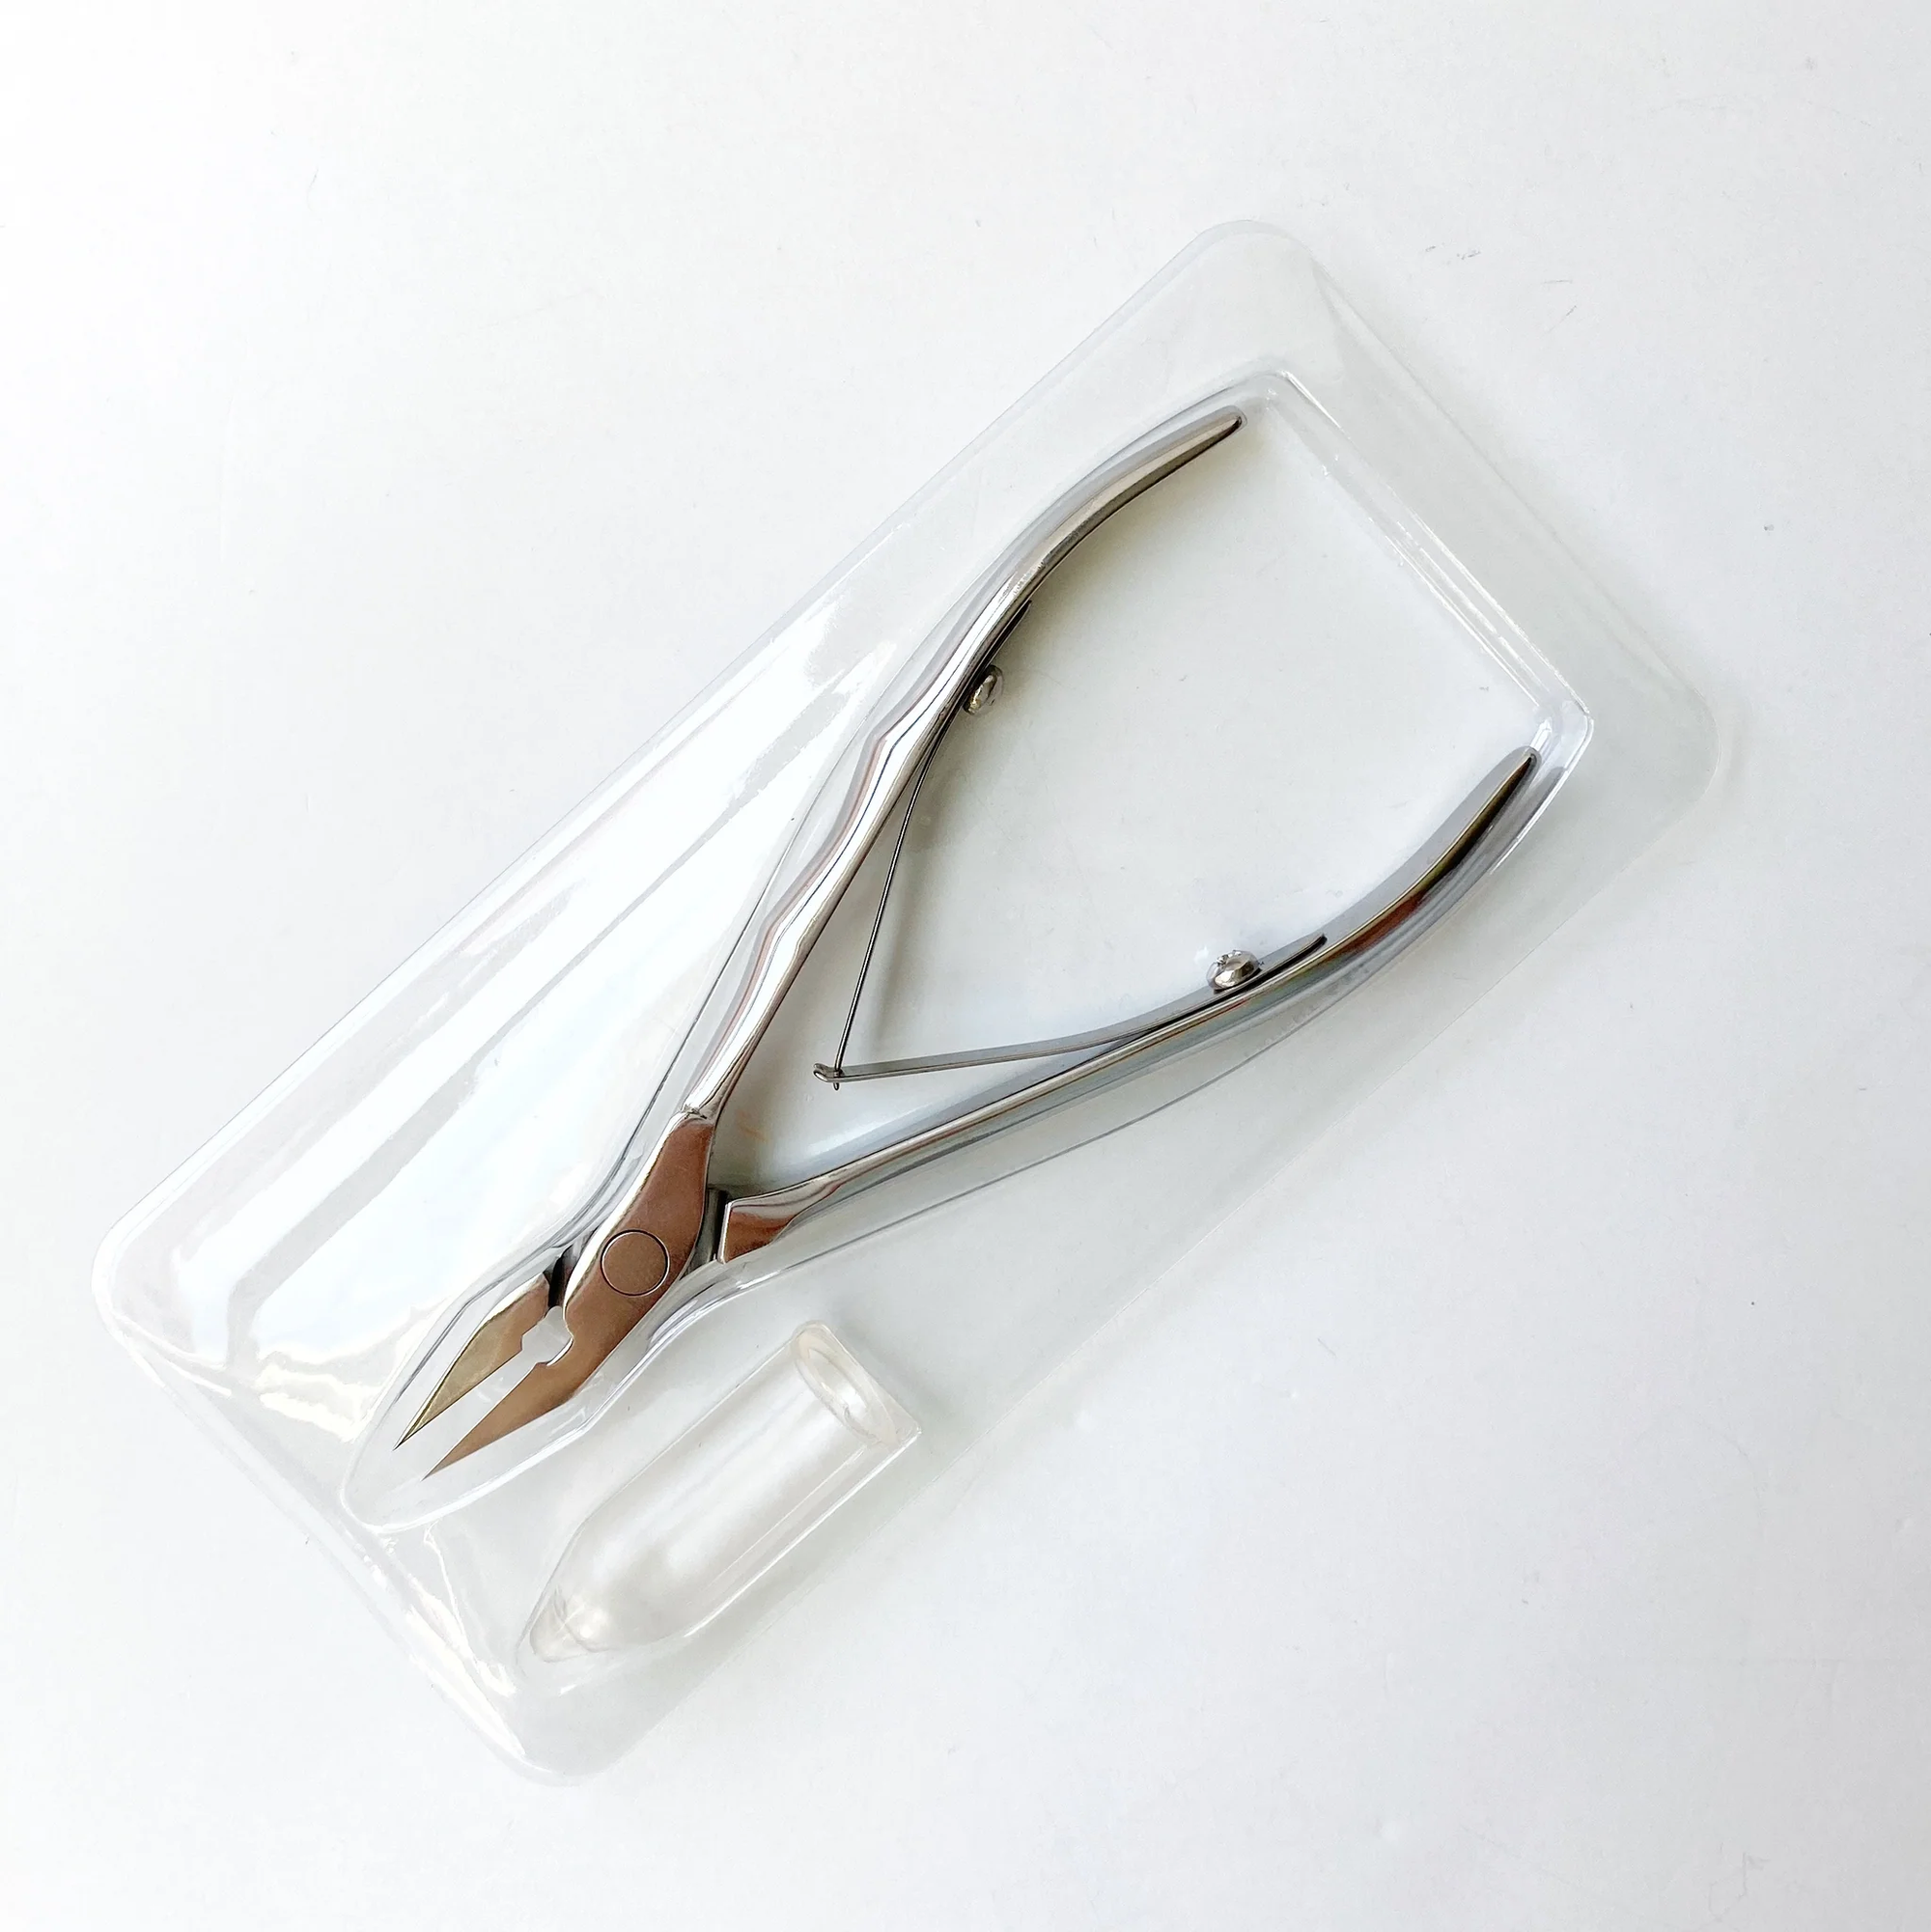 STALEKS PRO Pedicure Nippers, EXPERT 61/16 for Ingrown Nails (16mm edge)